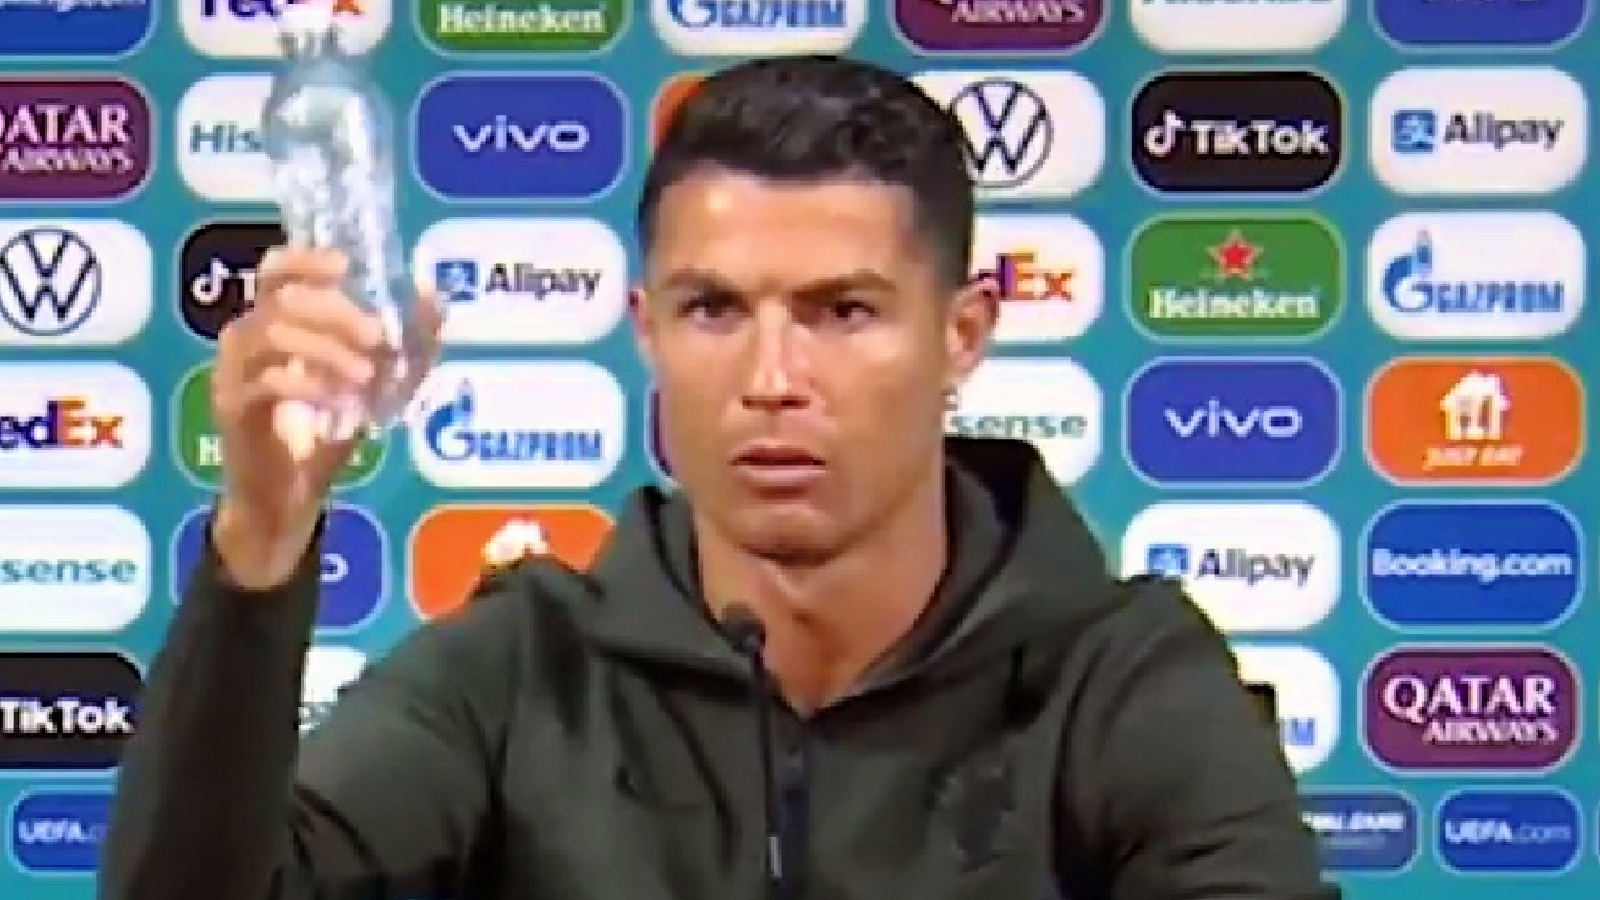 Video: Cristiano Ronaldo promotes healthy living during press conference